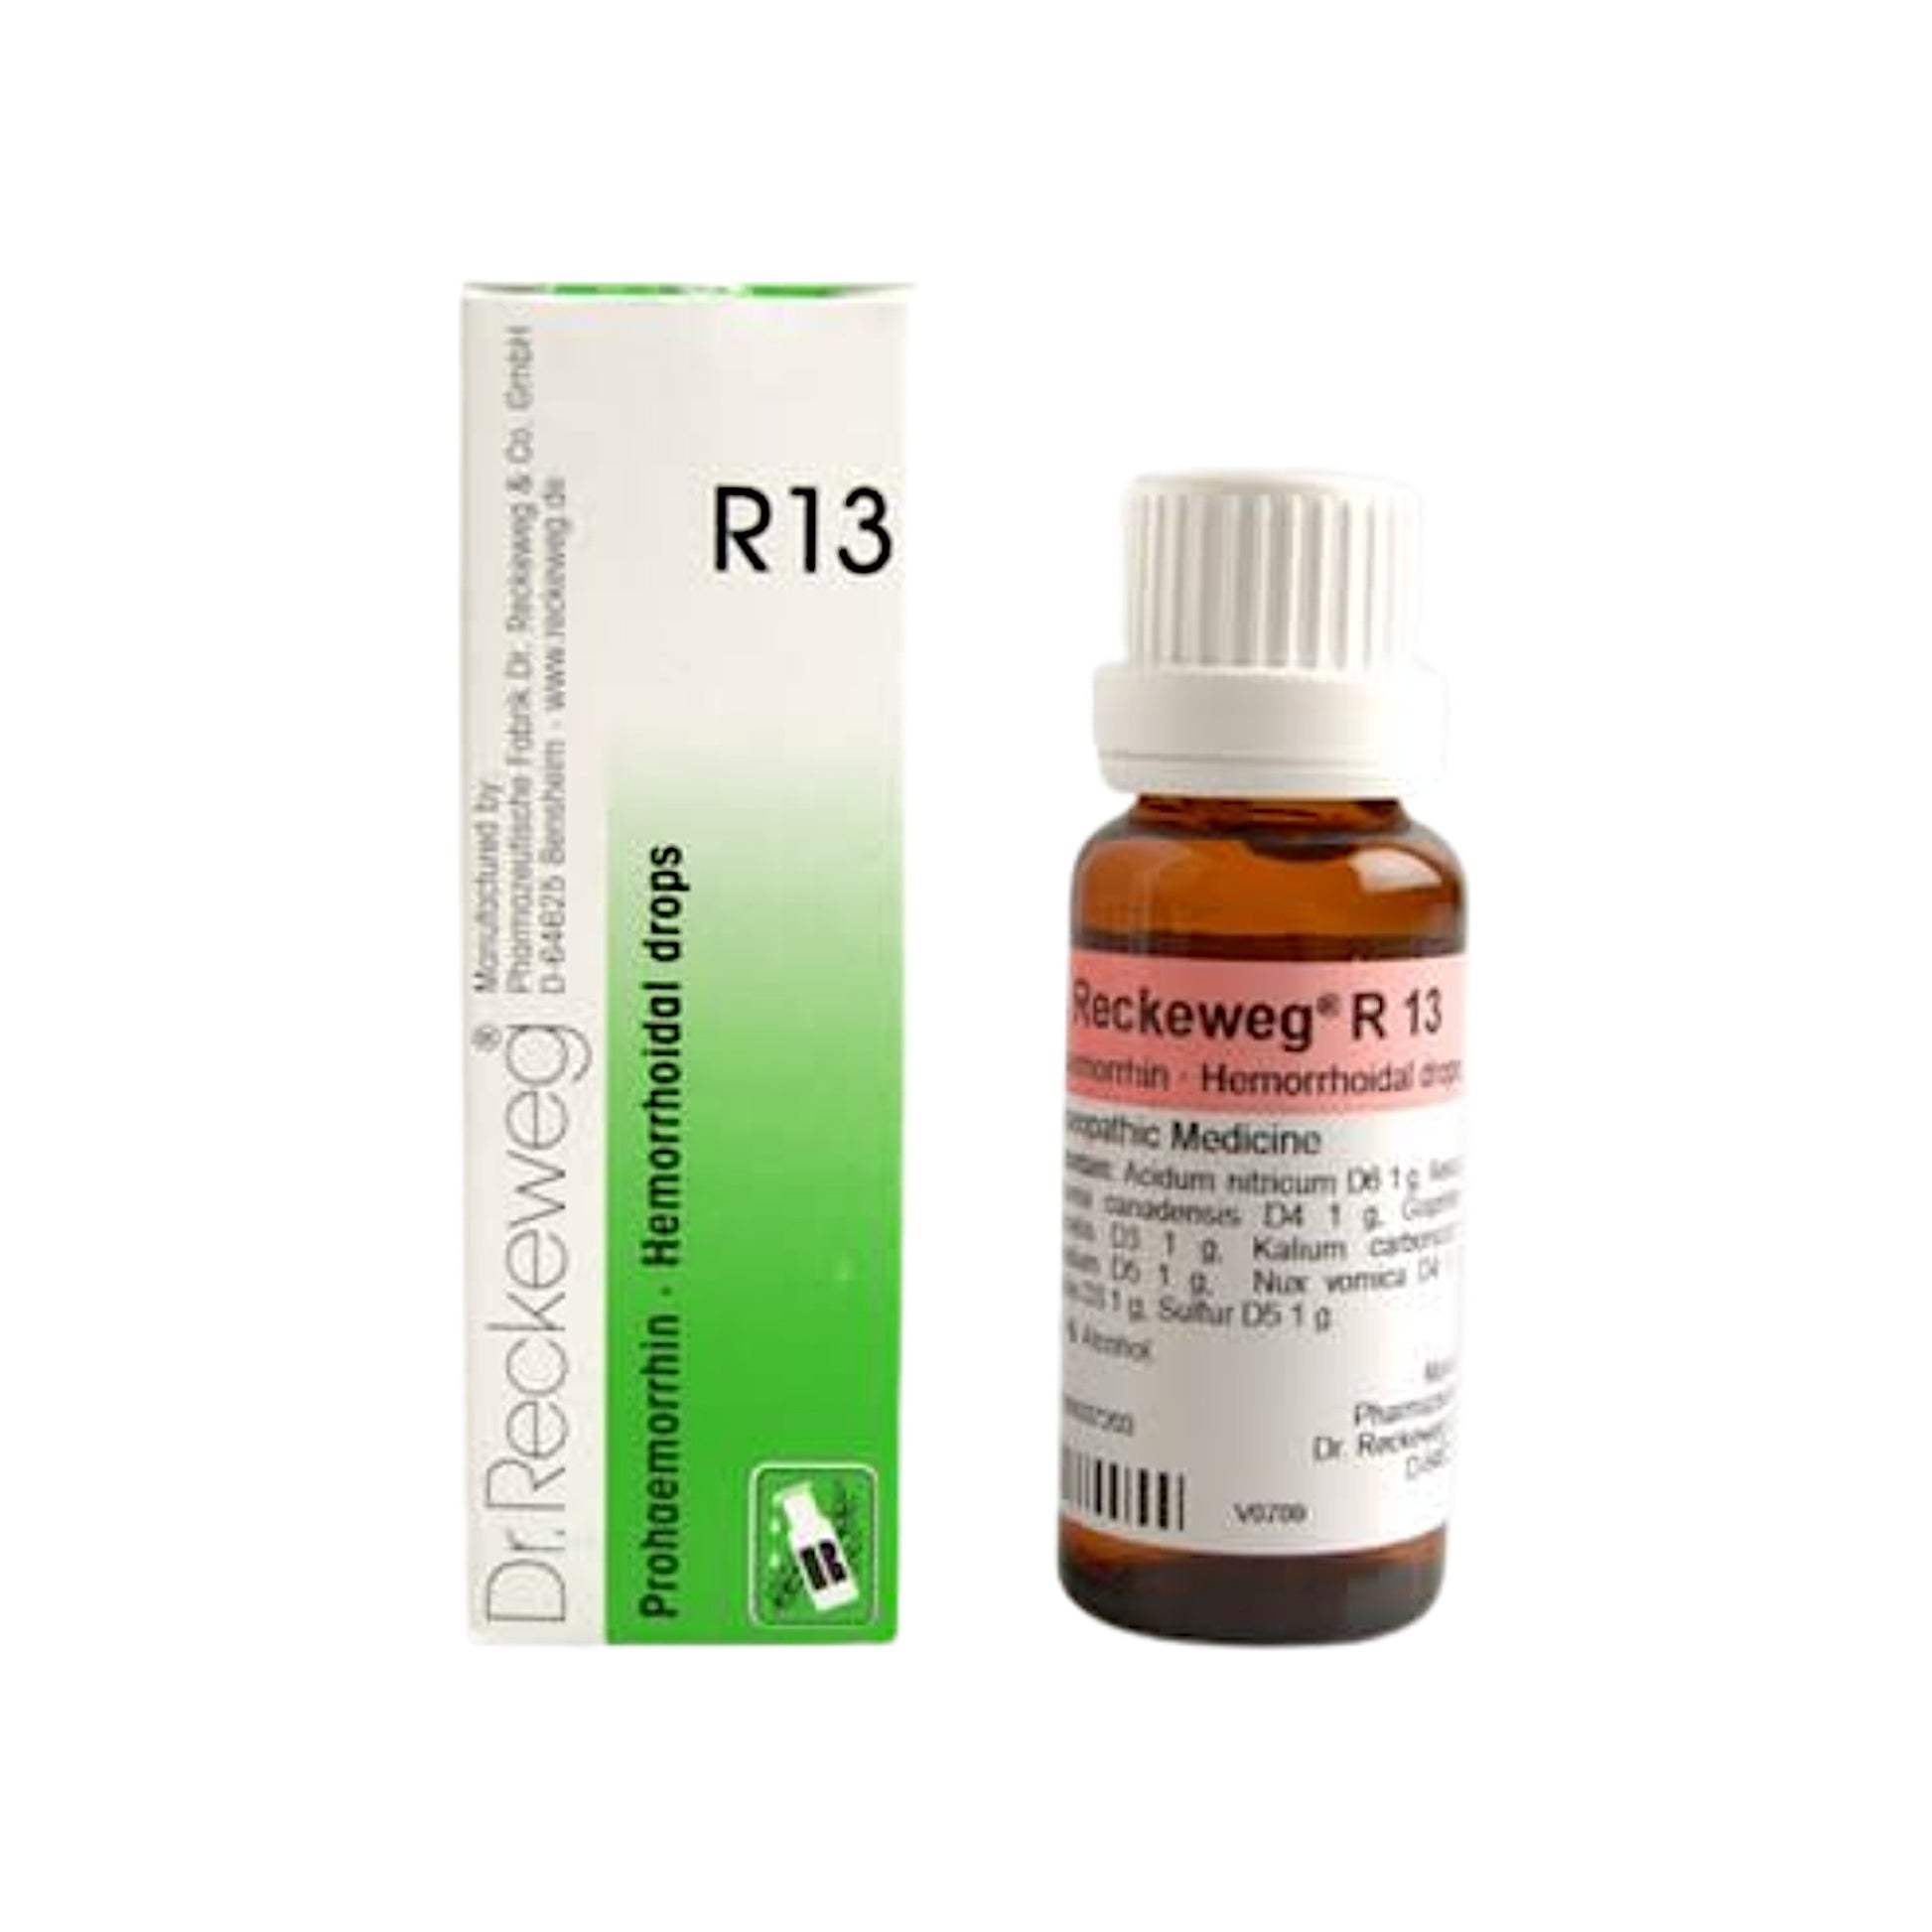 Image for DR. RECKEWEG R13 - Piles Drops 22 ml: Homeopathic remedy for piles (hemorrhoids) and associated symptoms.